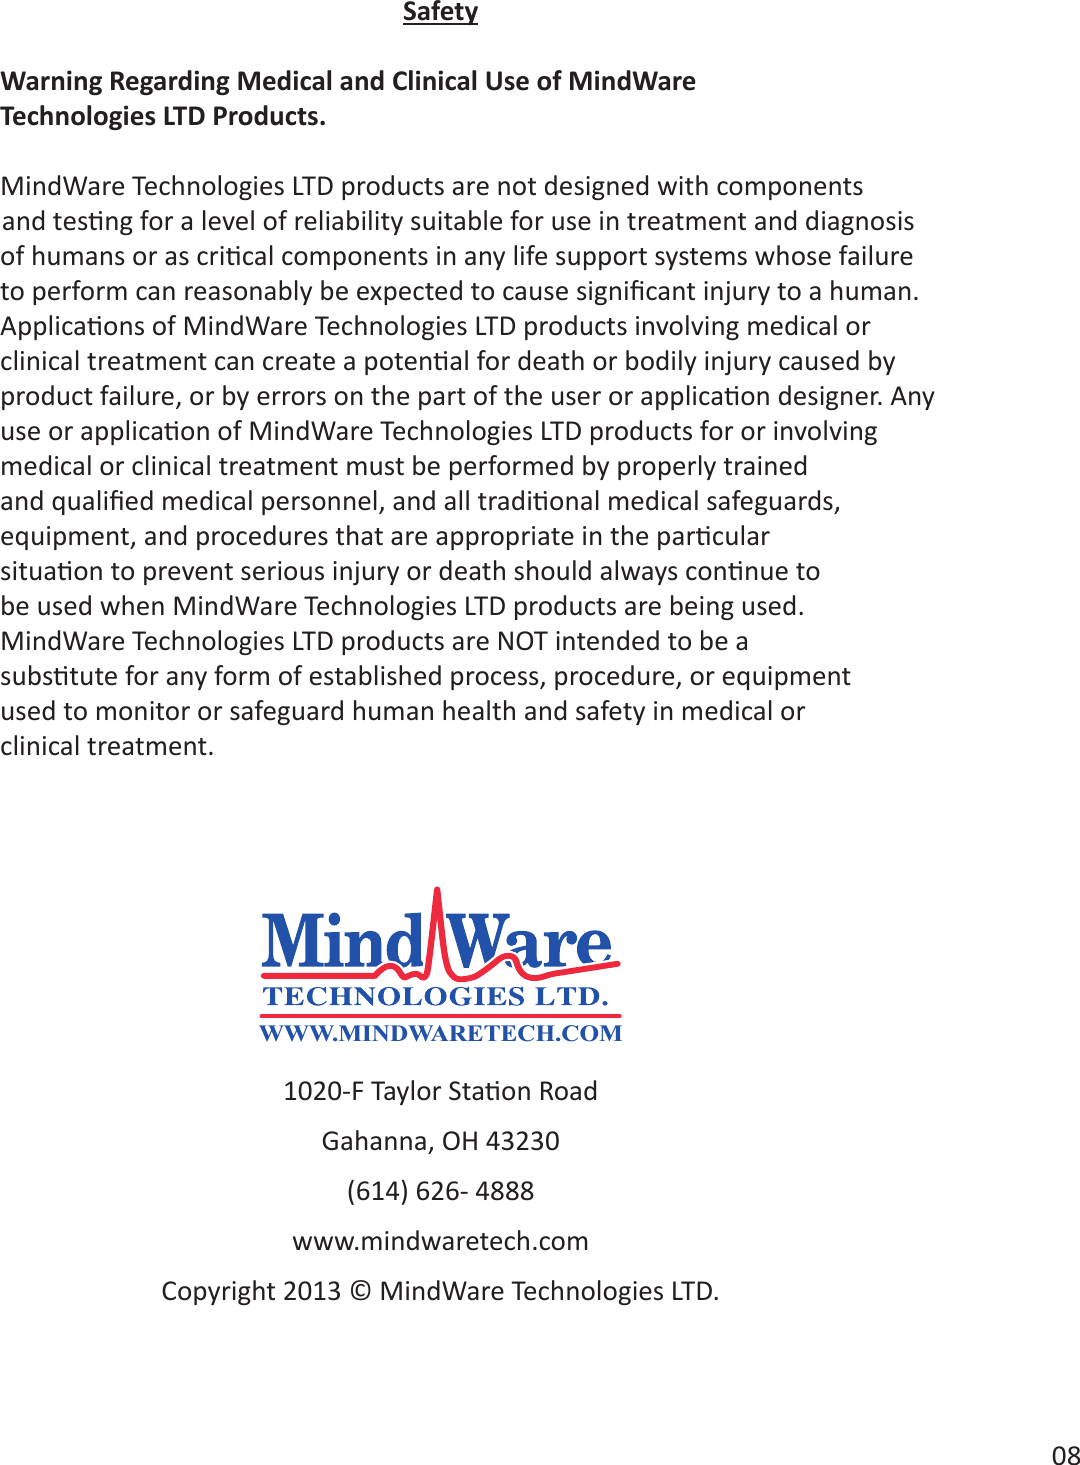 Safety      Warning Regarding Medical and Clinical Use of MindWare  TechnologiesLTDProducts.                                    clinical treatment.08WWW.MINDWARETECH.COM(614) 626- 4888www.mindwaretech.com